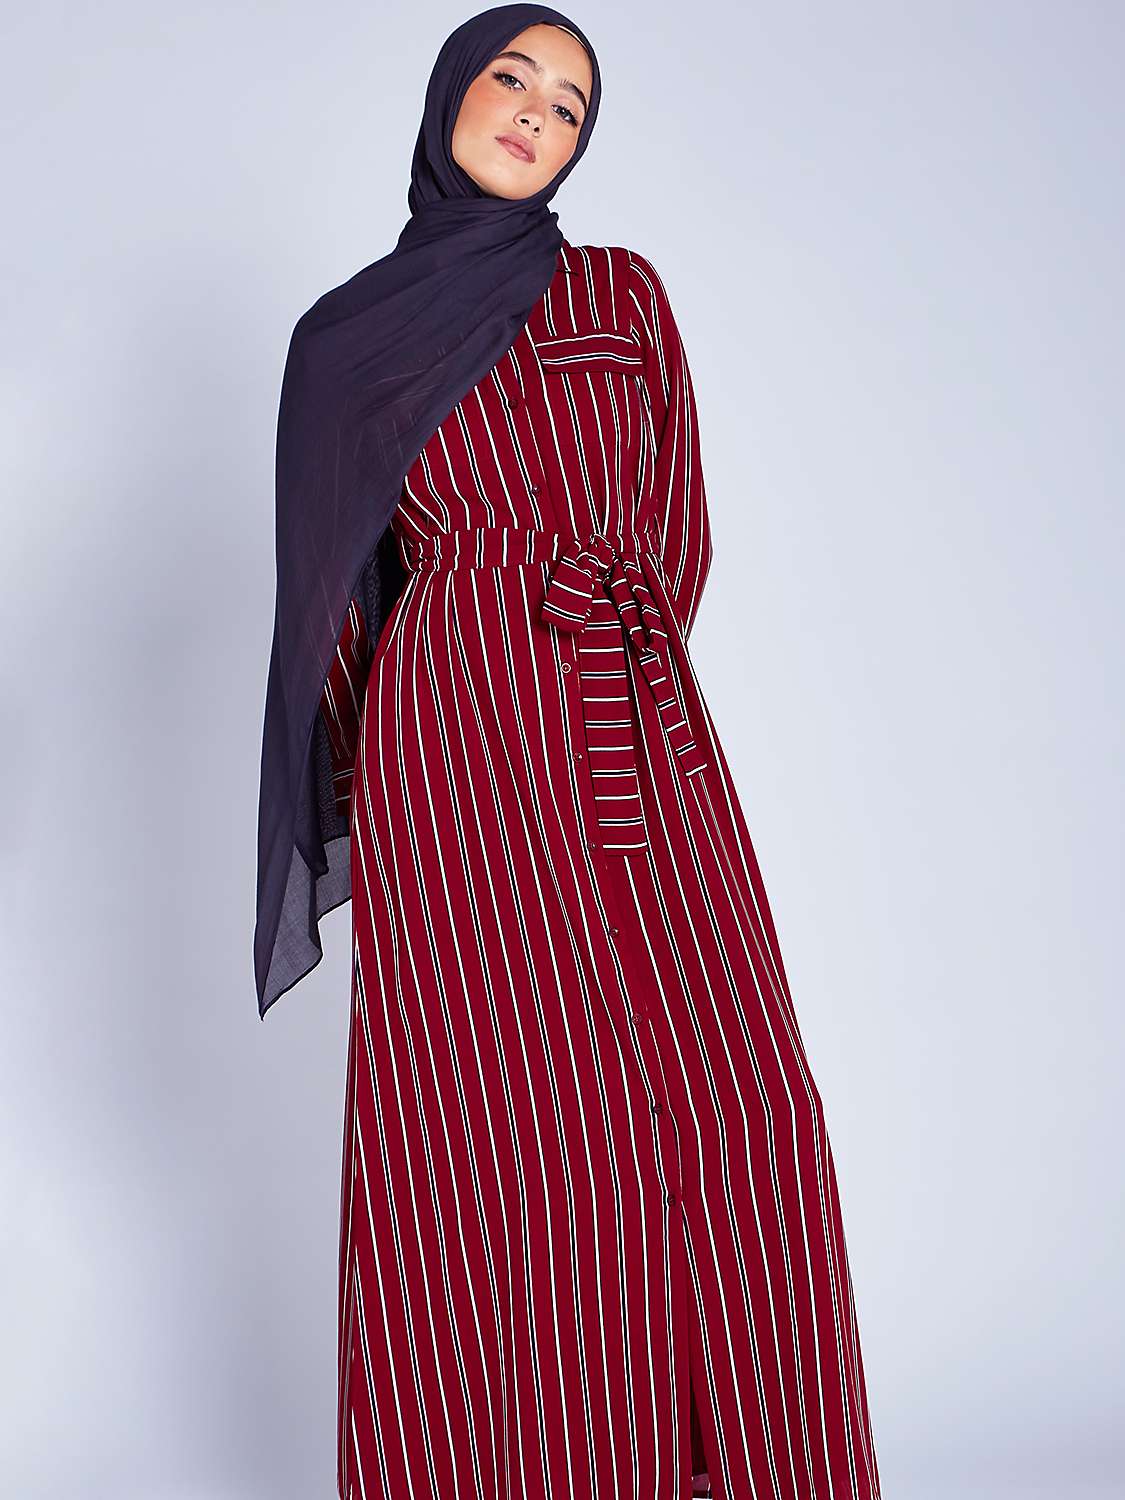 Buy Aab Raya Maxi Dress, Red Online at johnlewis.com